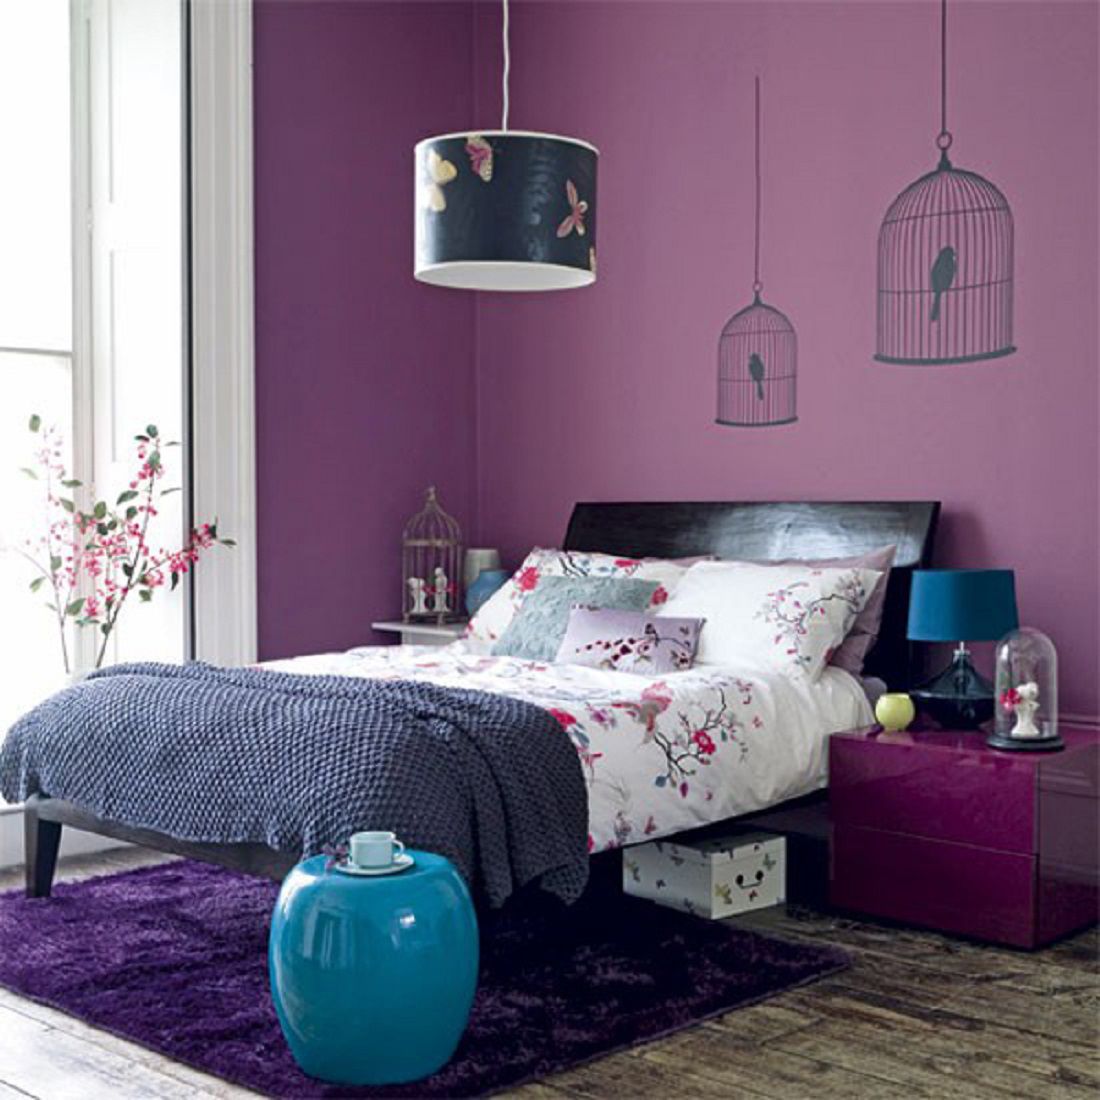 Asian inspired blue and purple bedroom.